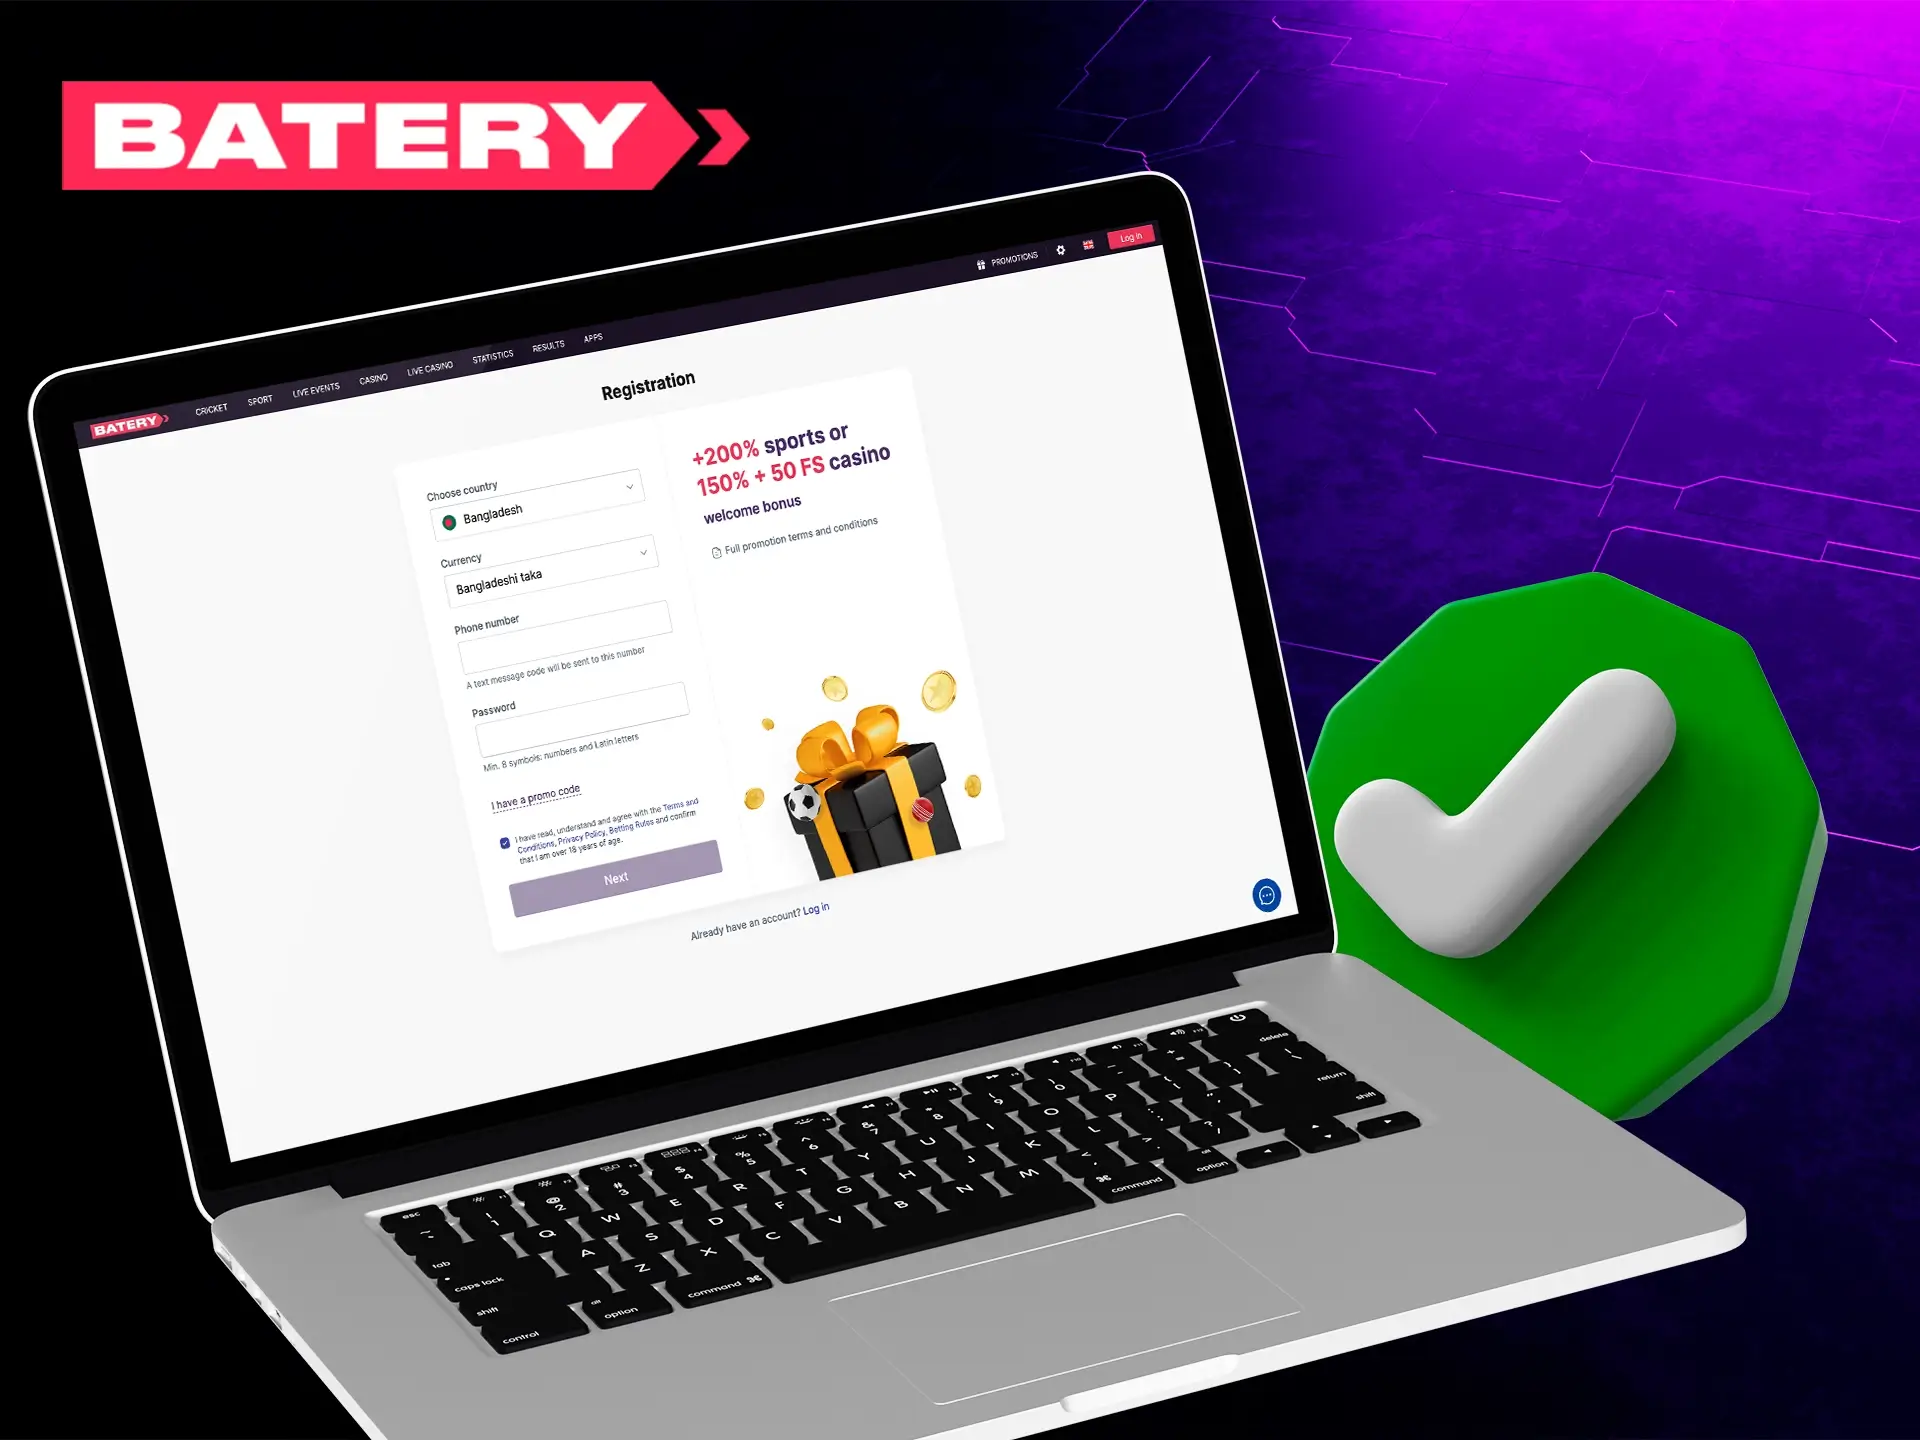 Creating a new account with Batery is easy, just fill out the form and confirm your registration.